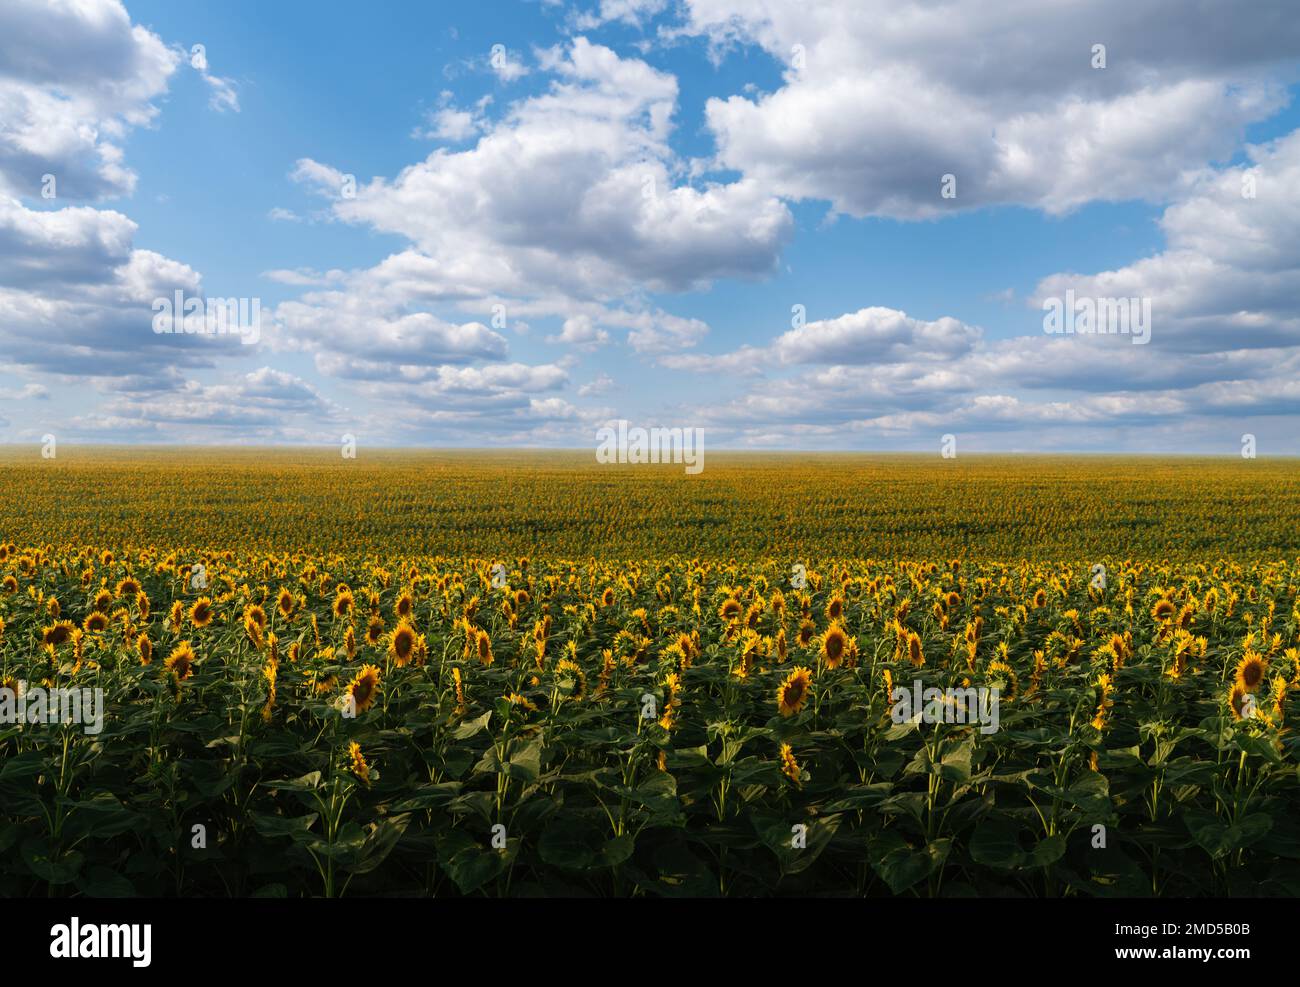 Agricultural Field of yellow sunflowers Stock Photo